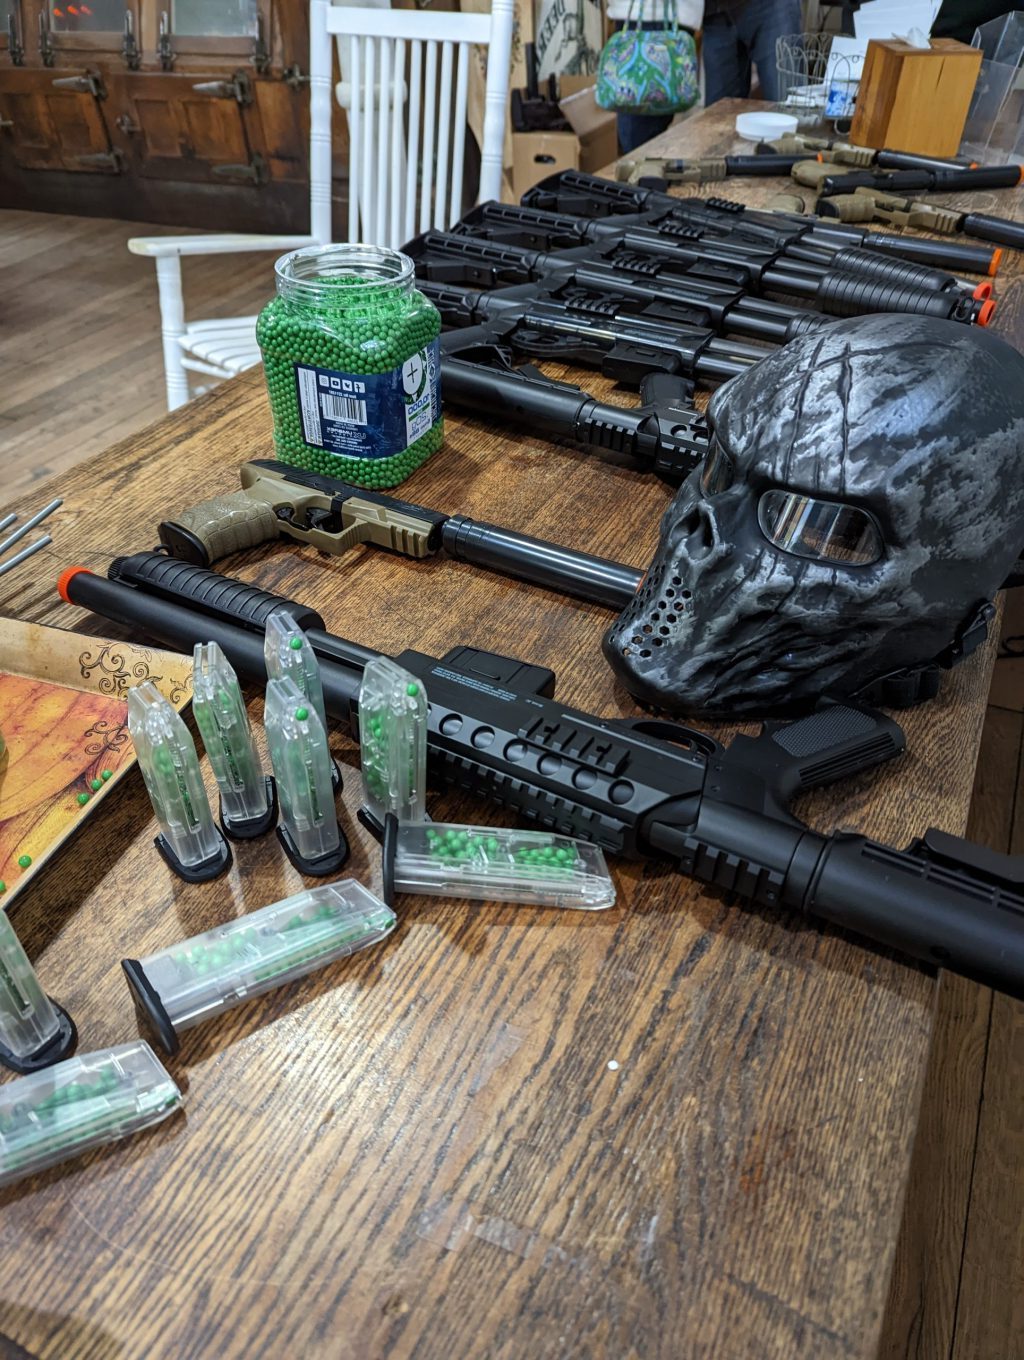 black airsoft guns lined up on a wooden counter with green pellets in a container and a black and grey protective mask